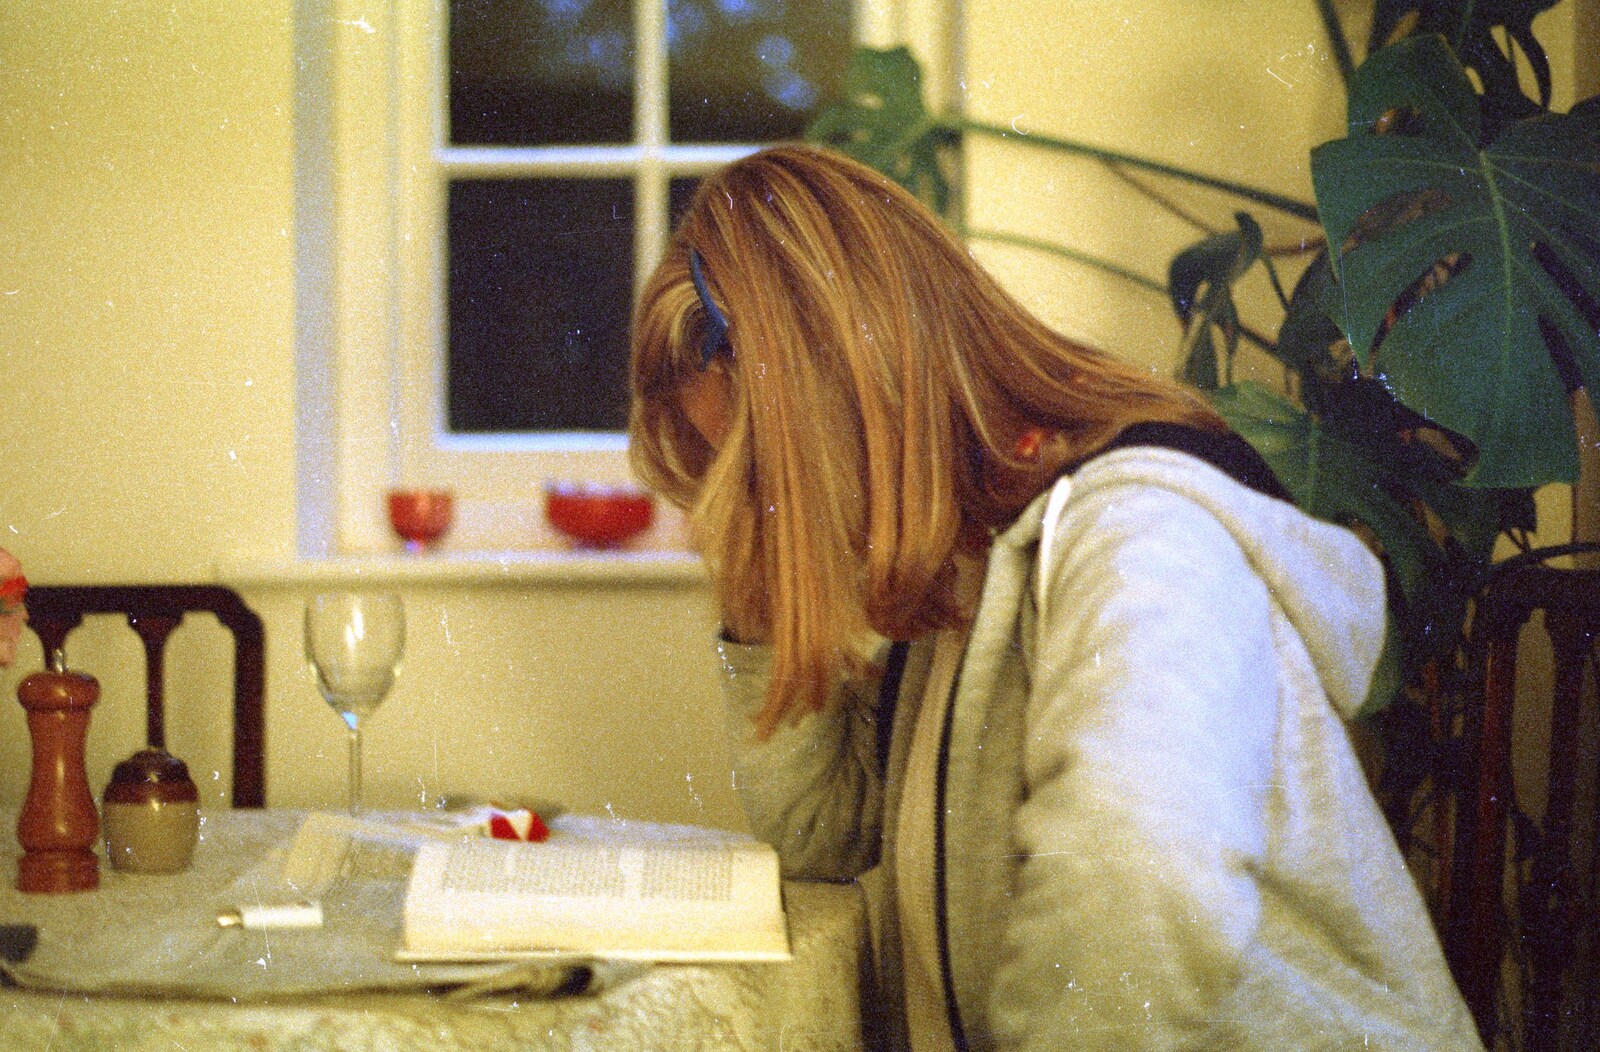 Mother reads a book  from A Ford Cottage Miscellany, Barton on Sea, Hampshire - 7th July 1986